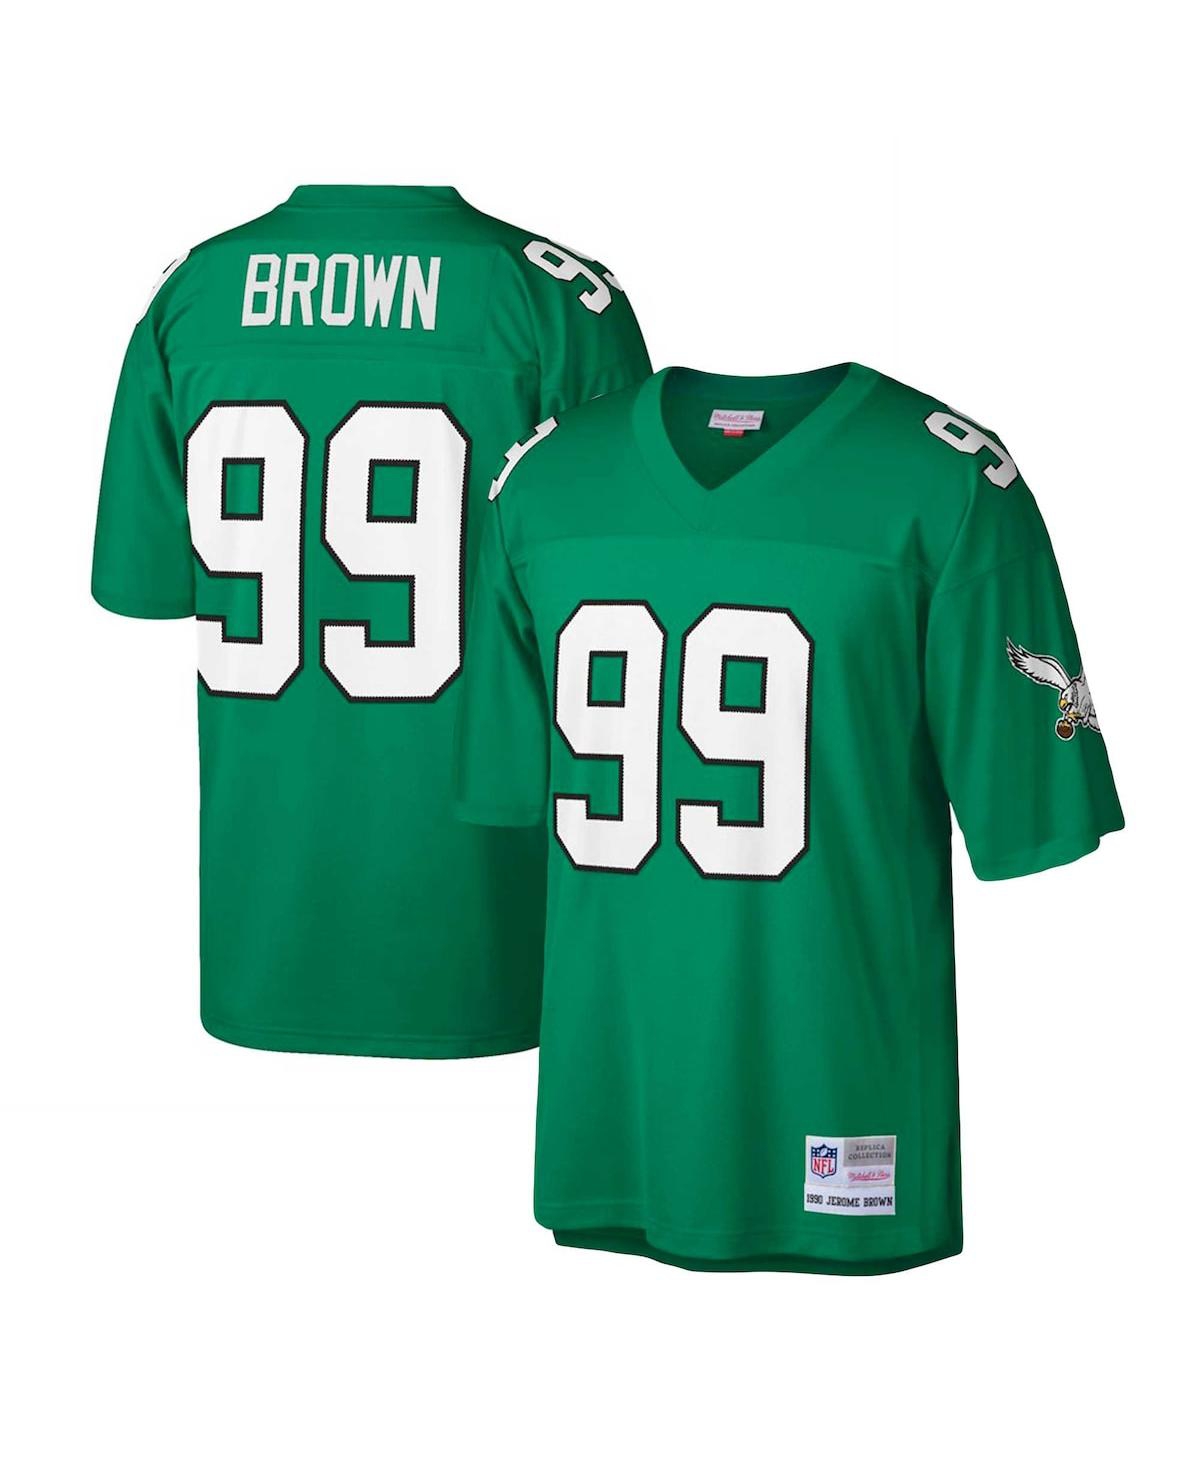 Men's Jerome Brown Kelly Green Philadelphia Eagles Big and Tall 1990 Retired Player Replica Jersey - Kelly Green